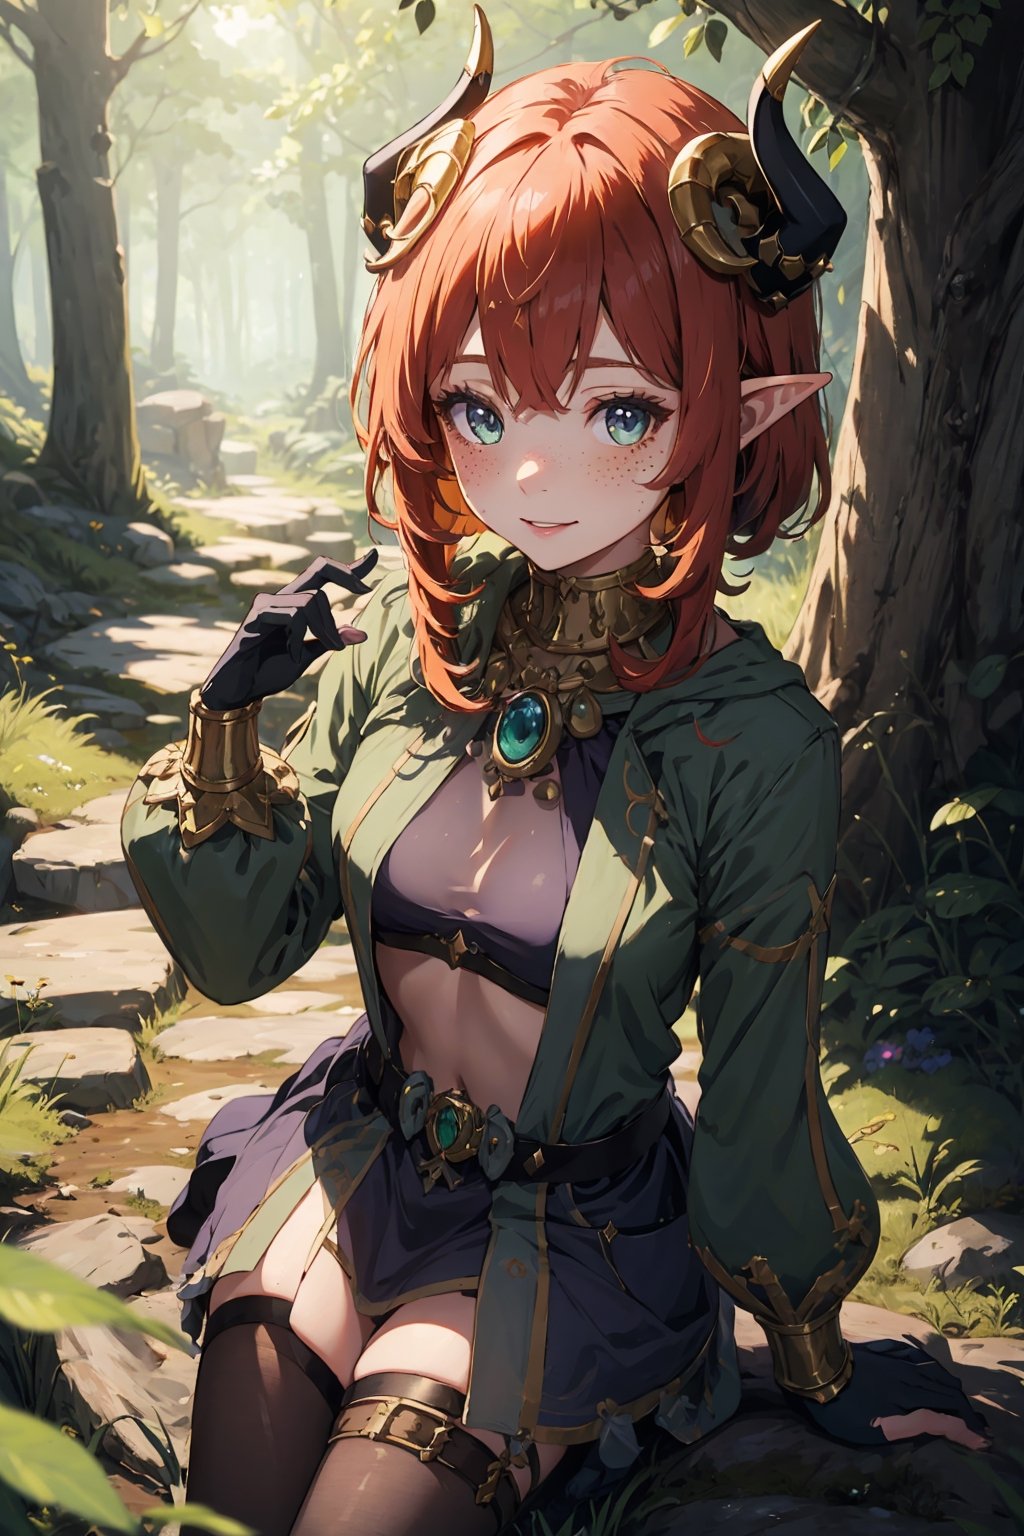 Imagine a female child with short messy vibrant purple hair in a short hair cut. She has small breasts. She has bright green eyes. She has pointed elf ears. She has two short horns on her head. She has an evil smile on her face that shows she's up to no good. She has warm freckles on her face. She wears a modest outfit with a long green trench coat with lots of pockets. She is practicing magic that sparkles around her. The background is a charming forest path in the enchanted woods with bright lighting, creating a magical ambiance. This artwork captures the essence of mischief and magic against the backdrop of a beautiful setting. detailed, detail_eyes, detailed_hair, detailed_scenario, detailed_hands, detailed_background, vox machina style,vox machina style,oil impasto, flat chest.,,niloudef